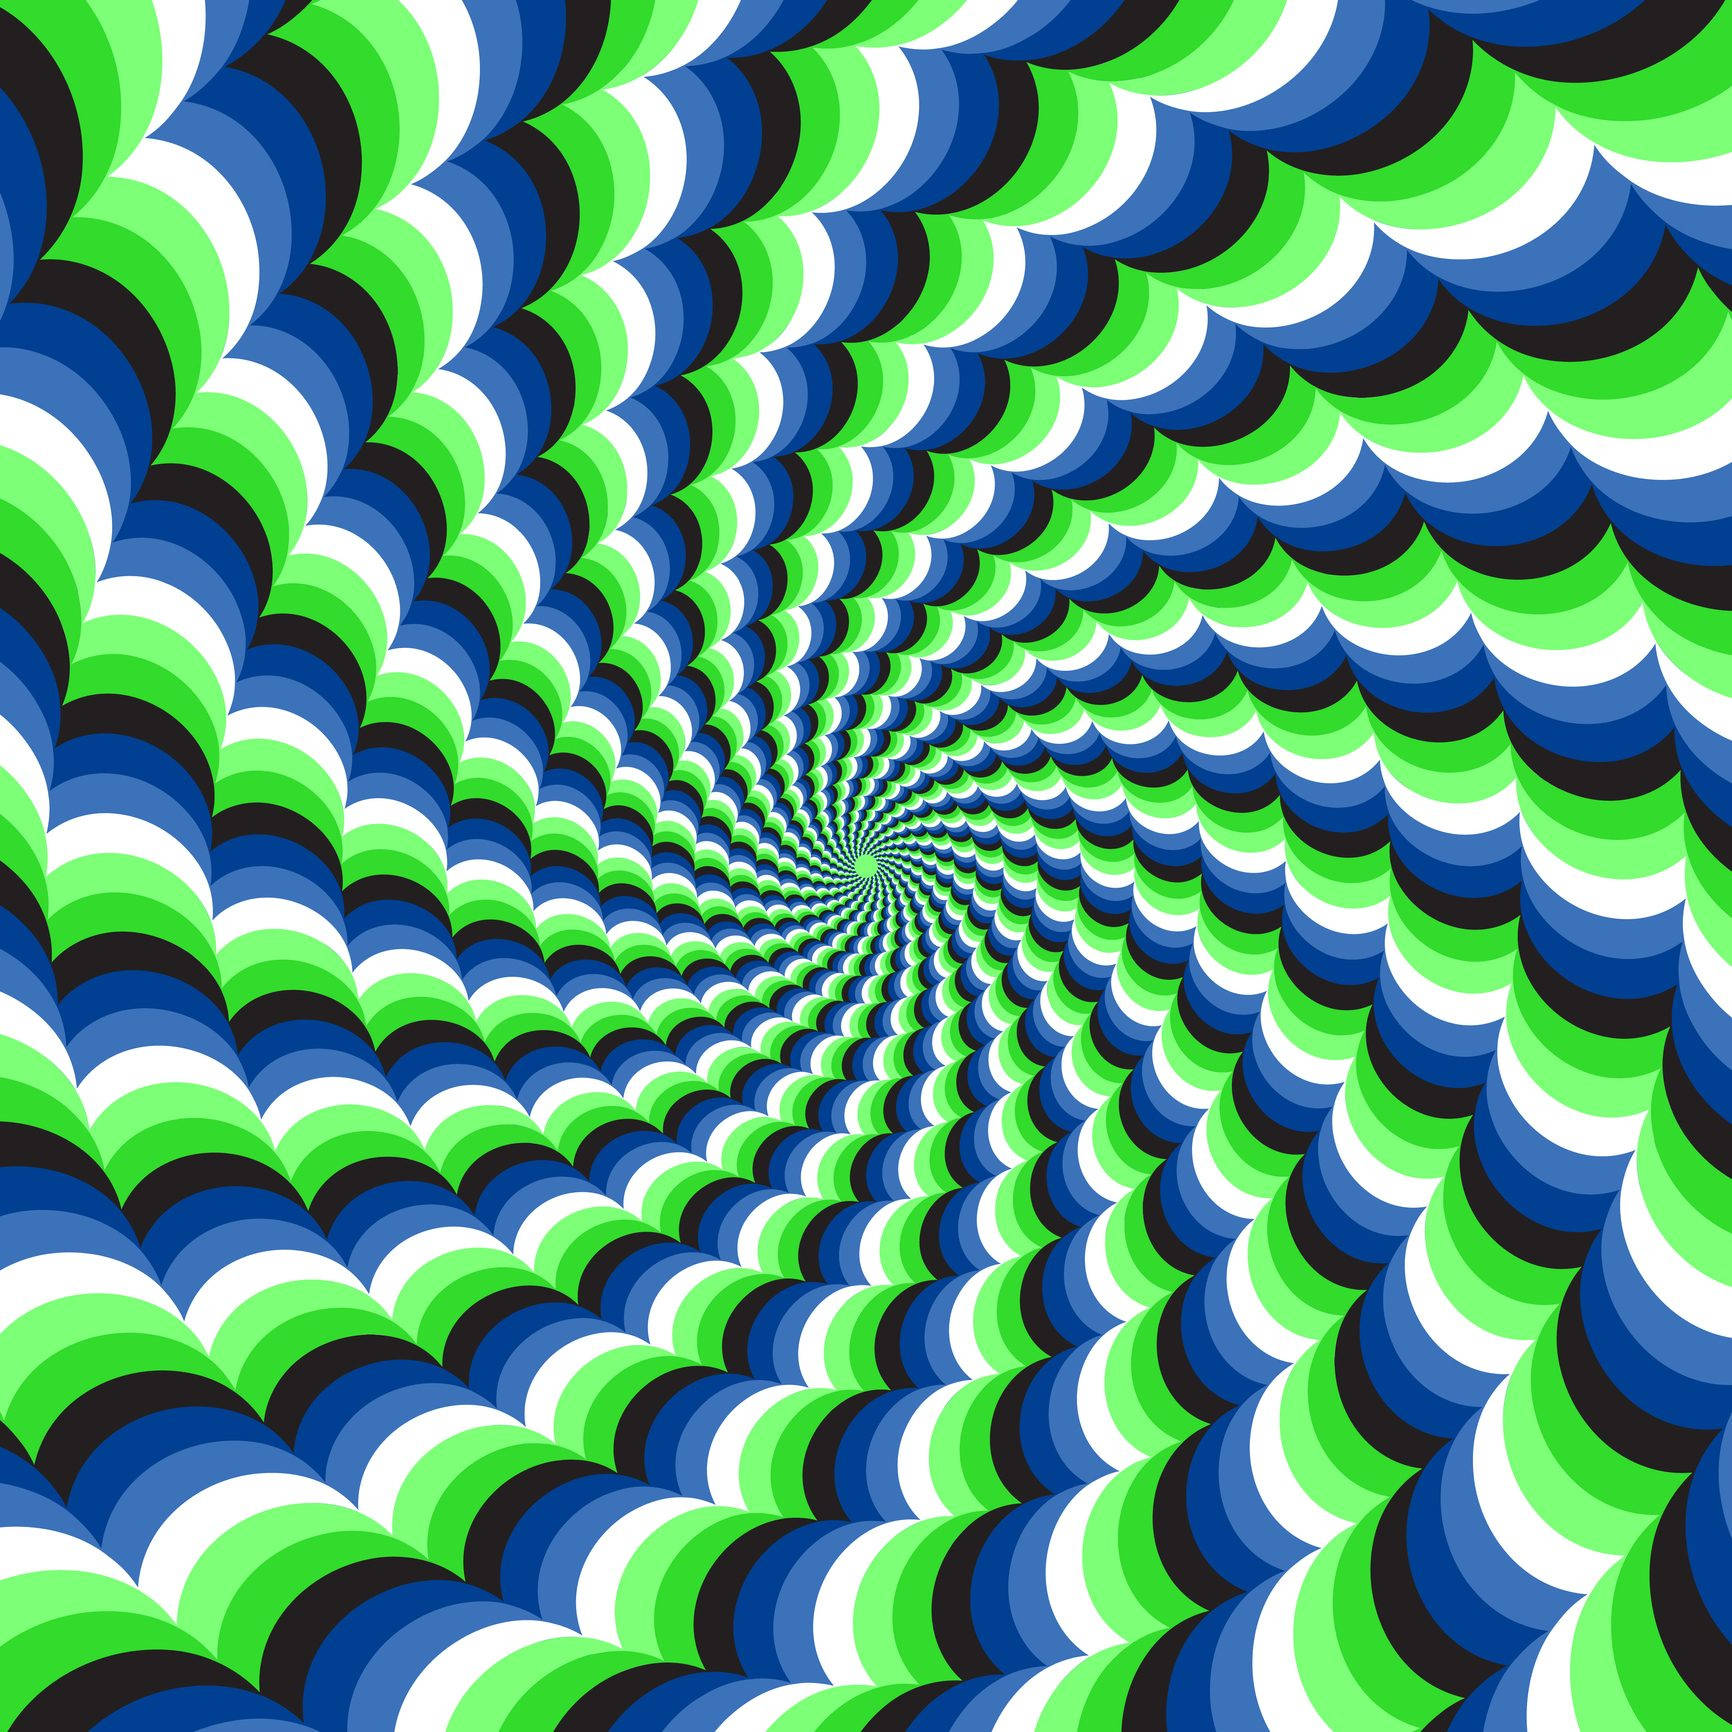 Ambiguous Spinning Blue And Green Vortex Wallpaper